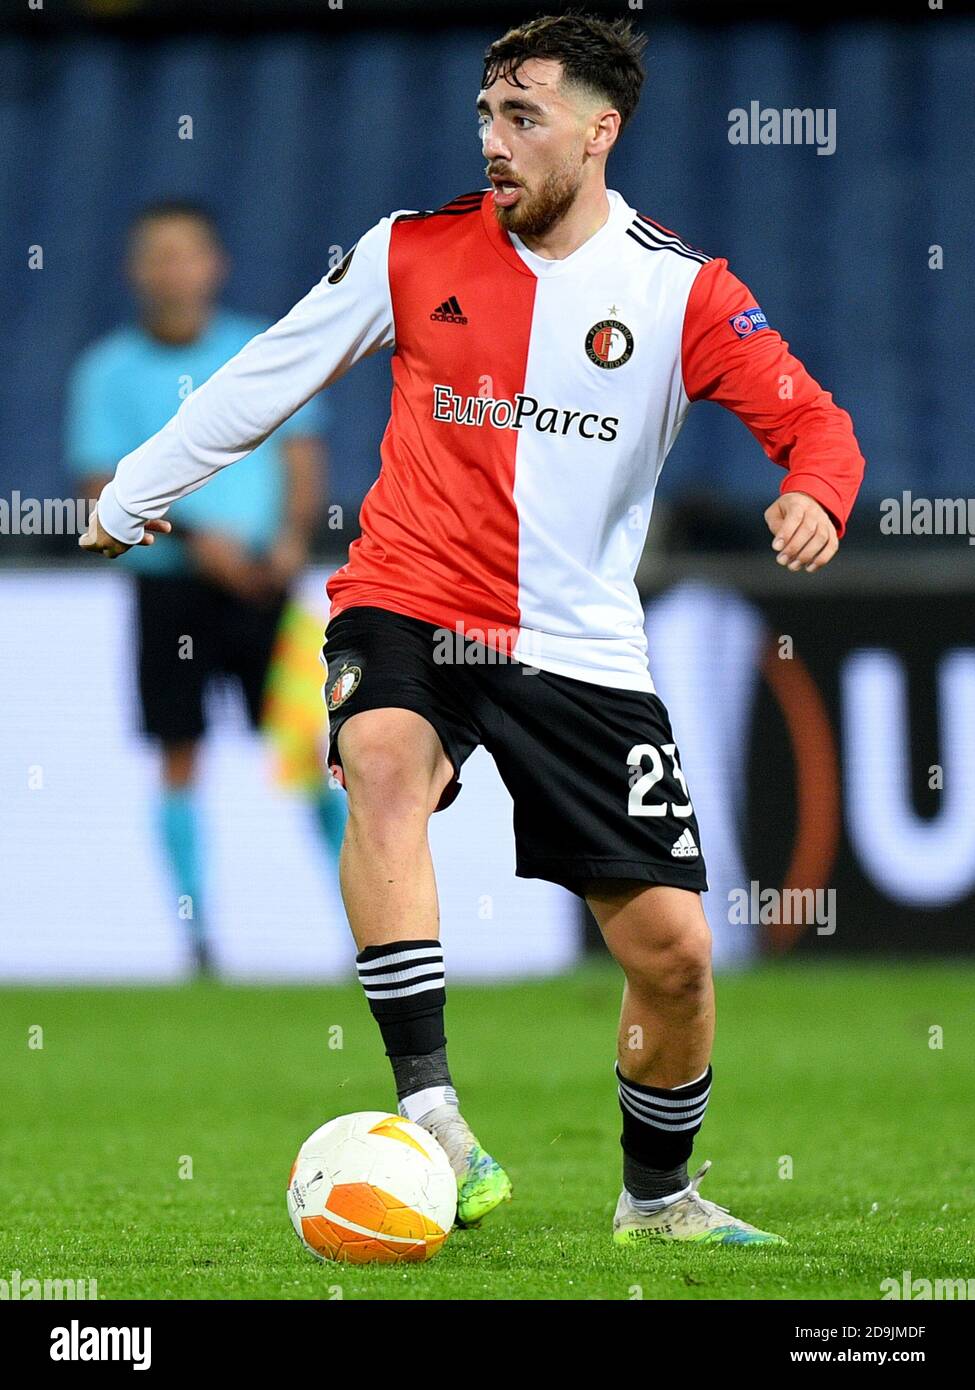 Rotterdam, The Netherlands. 5th Nov, 2020. Orkun Kokcu of Feyenoord during the UEFA Europa League, Group Stage, Group K football match between Feyenoord and CSKA Moskva on november 5, 2020 at De Kuip stadium in Rotterdam, The Netherlands - Photo Yannick Verhoeven/Orange Pictures/DPPI/LM Credit: Paola Benini/Alamy Live News Stock Photo